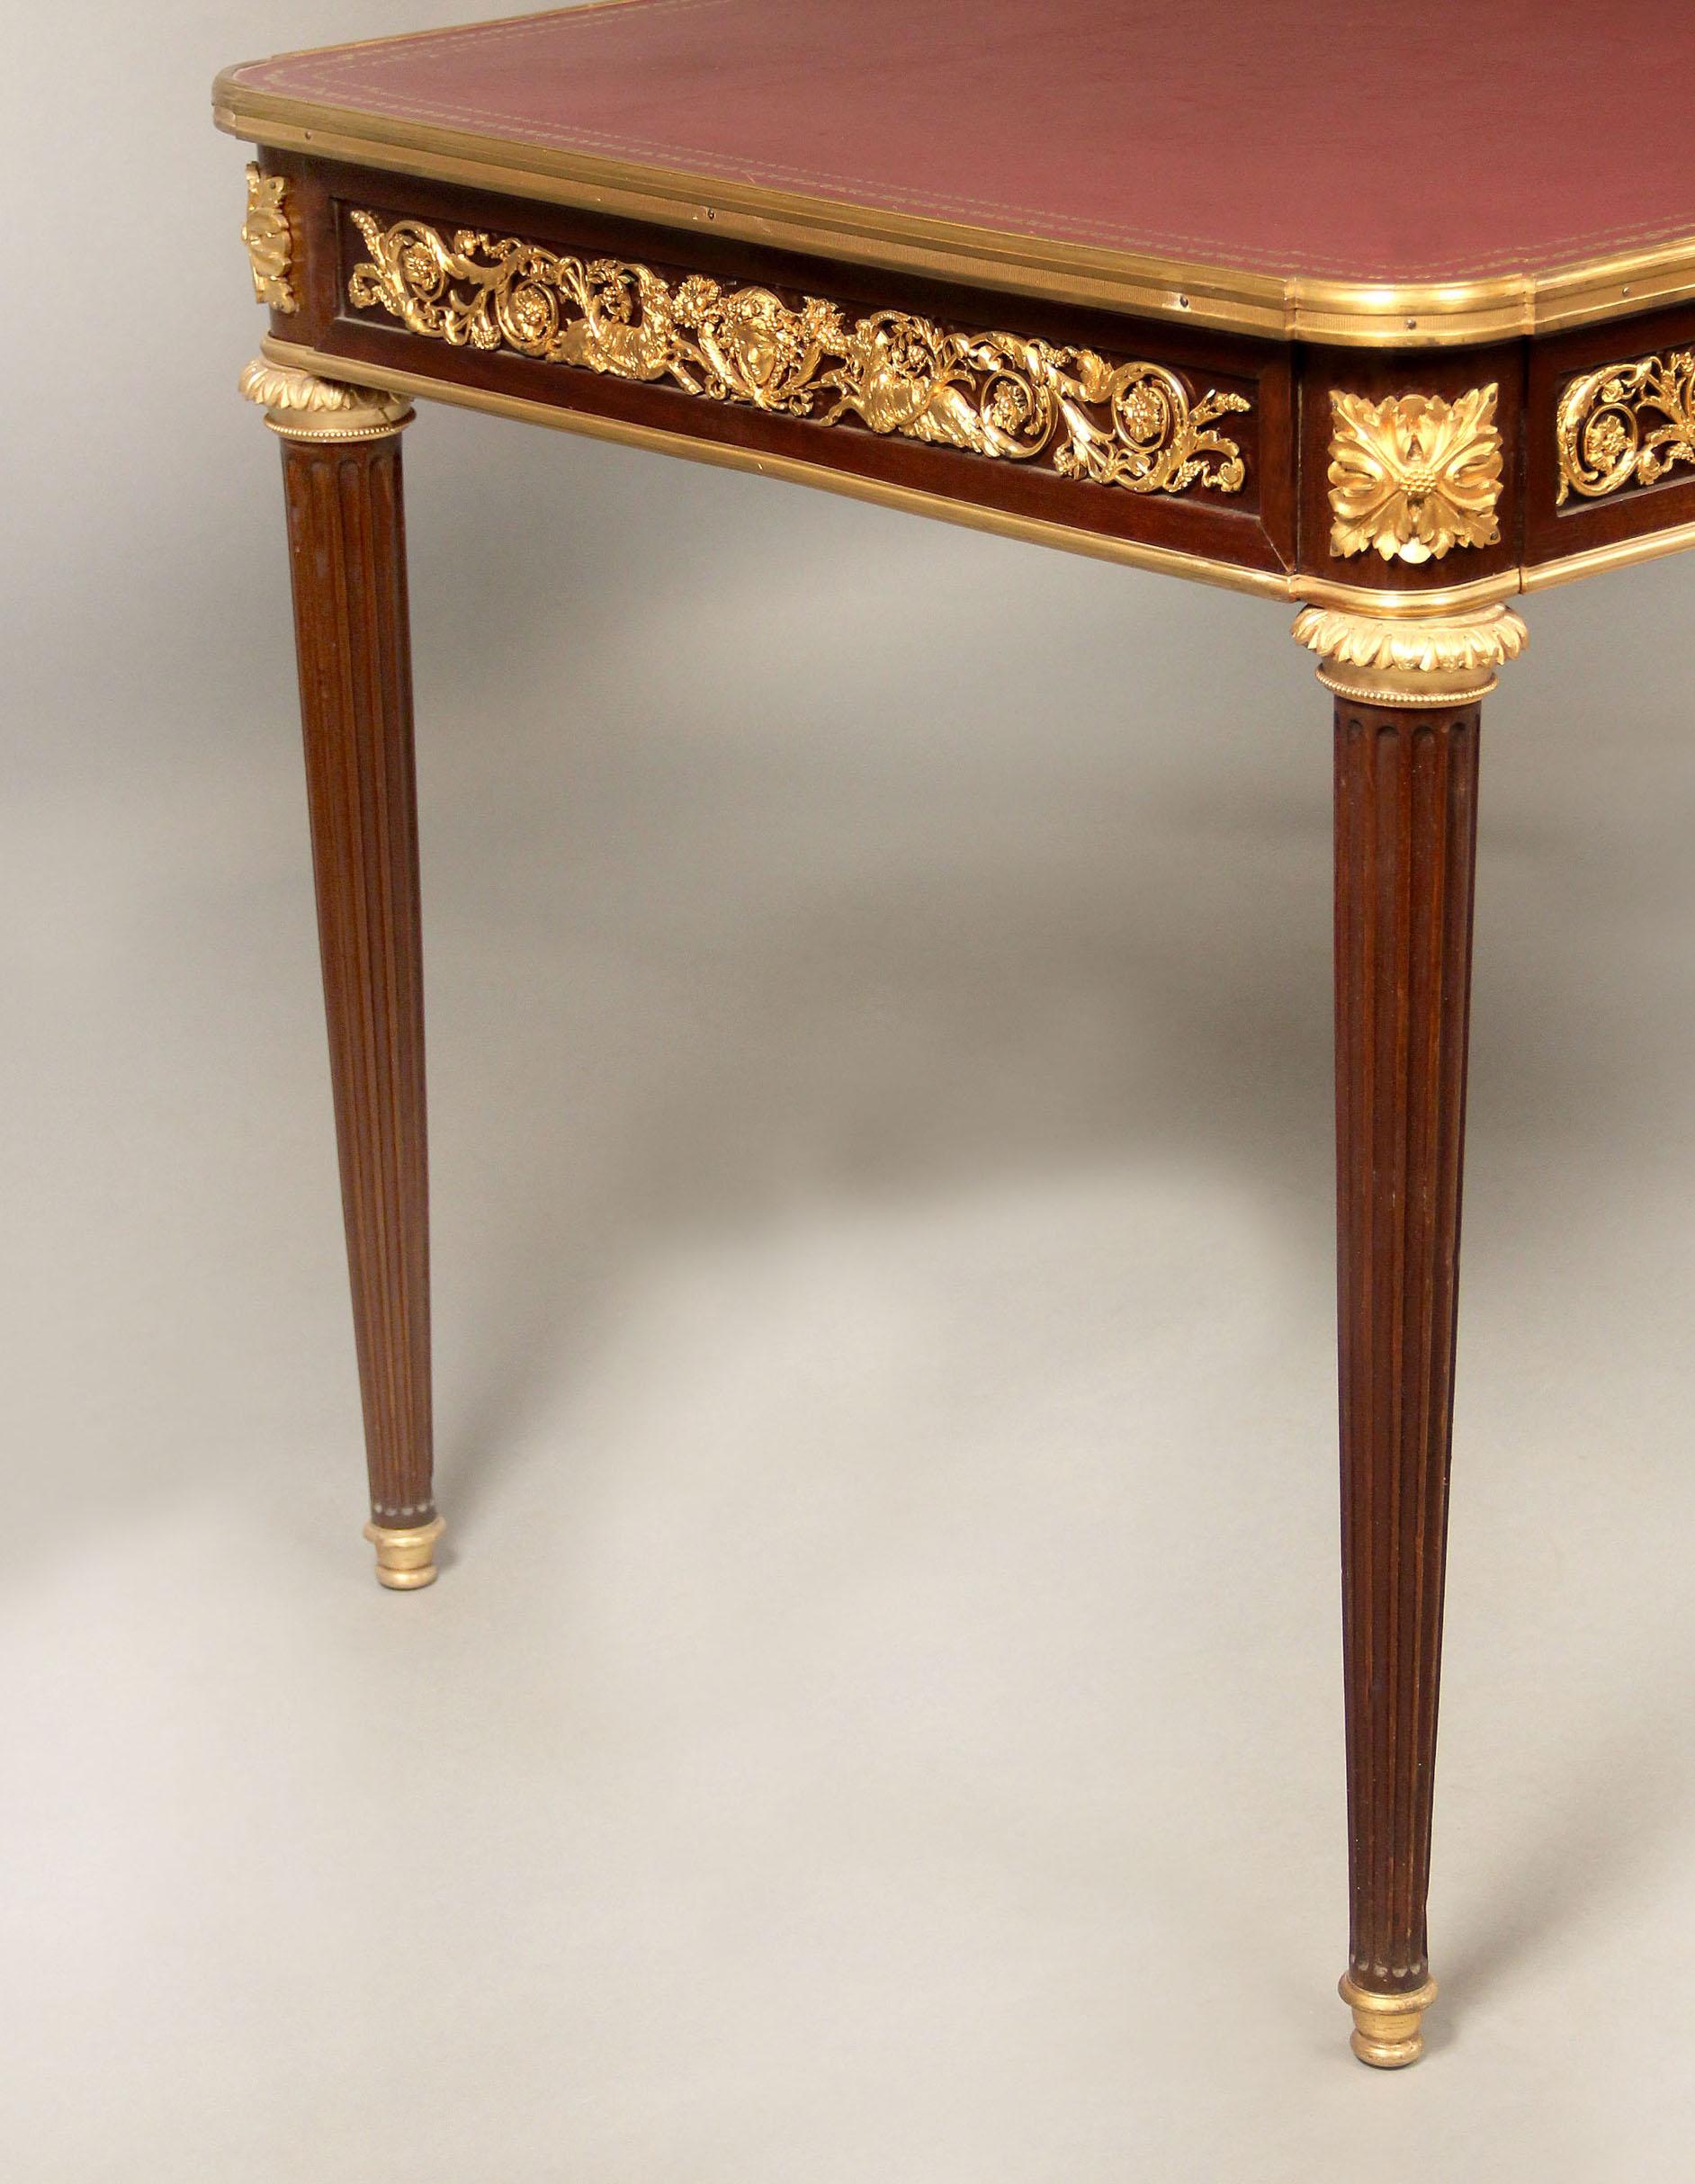 A Wonderful Late 19th Century Gilt Bronze Mounted Louis XVI Style Desk In Good Condition For Sale In New York, NY